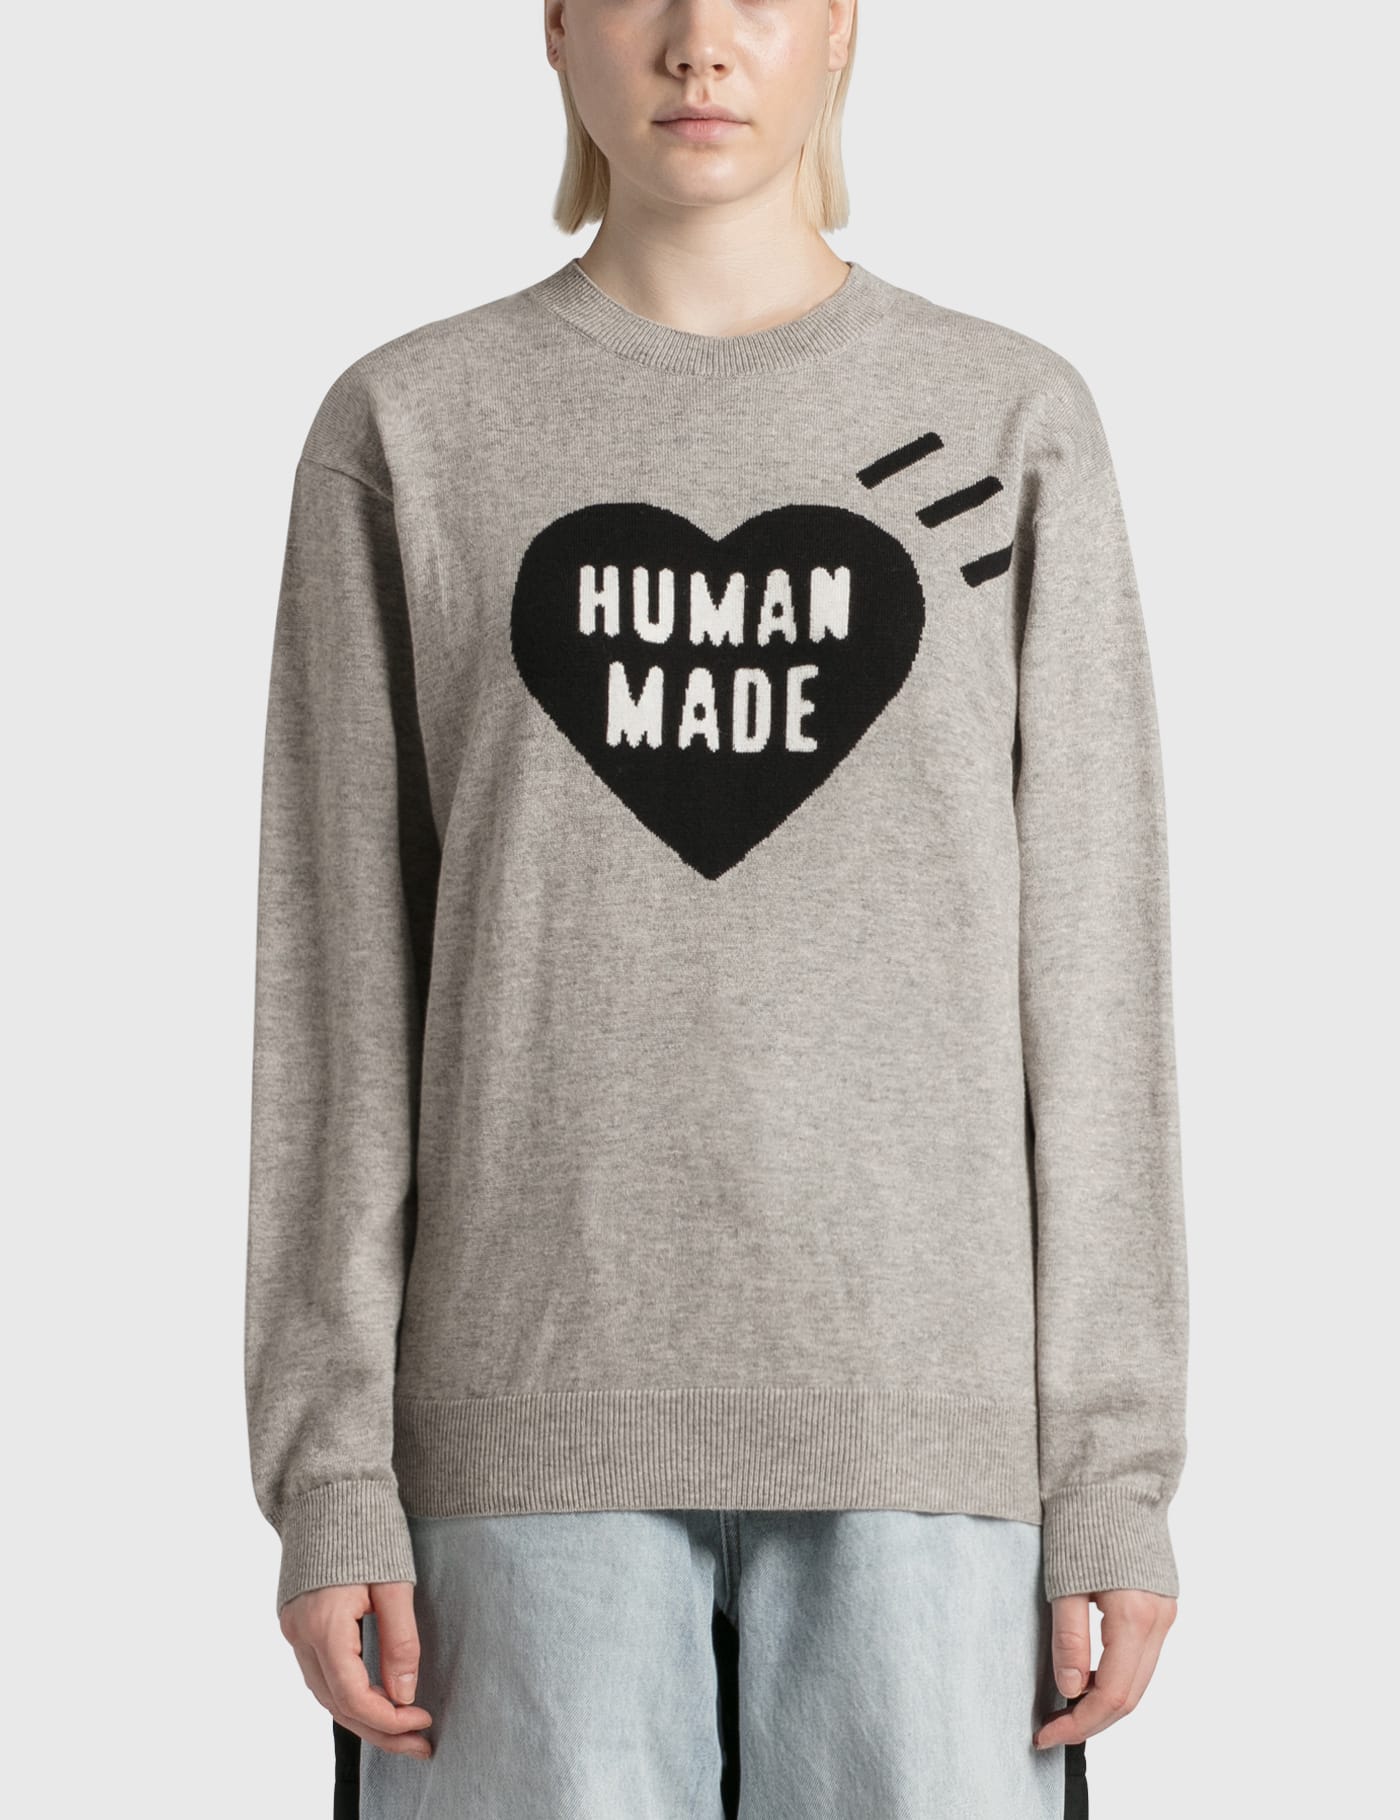 Human Made - Heart Knit Sweater | HBX - Globally Curated Fashion